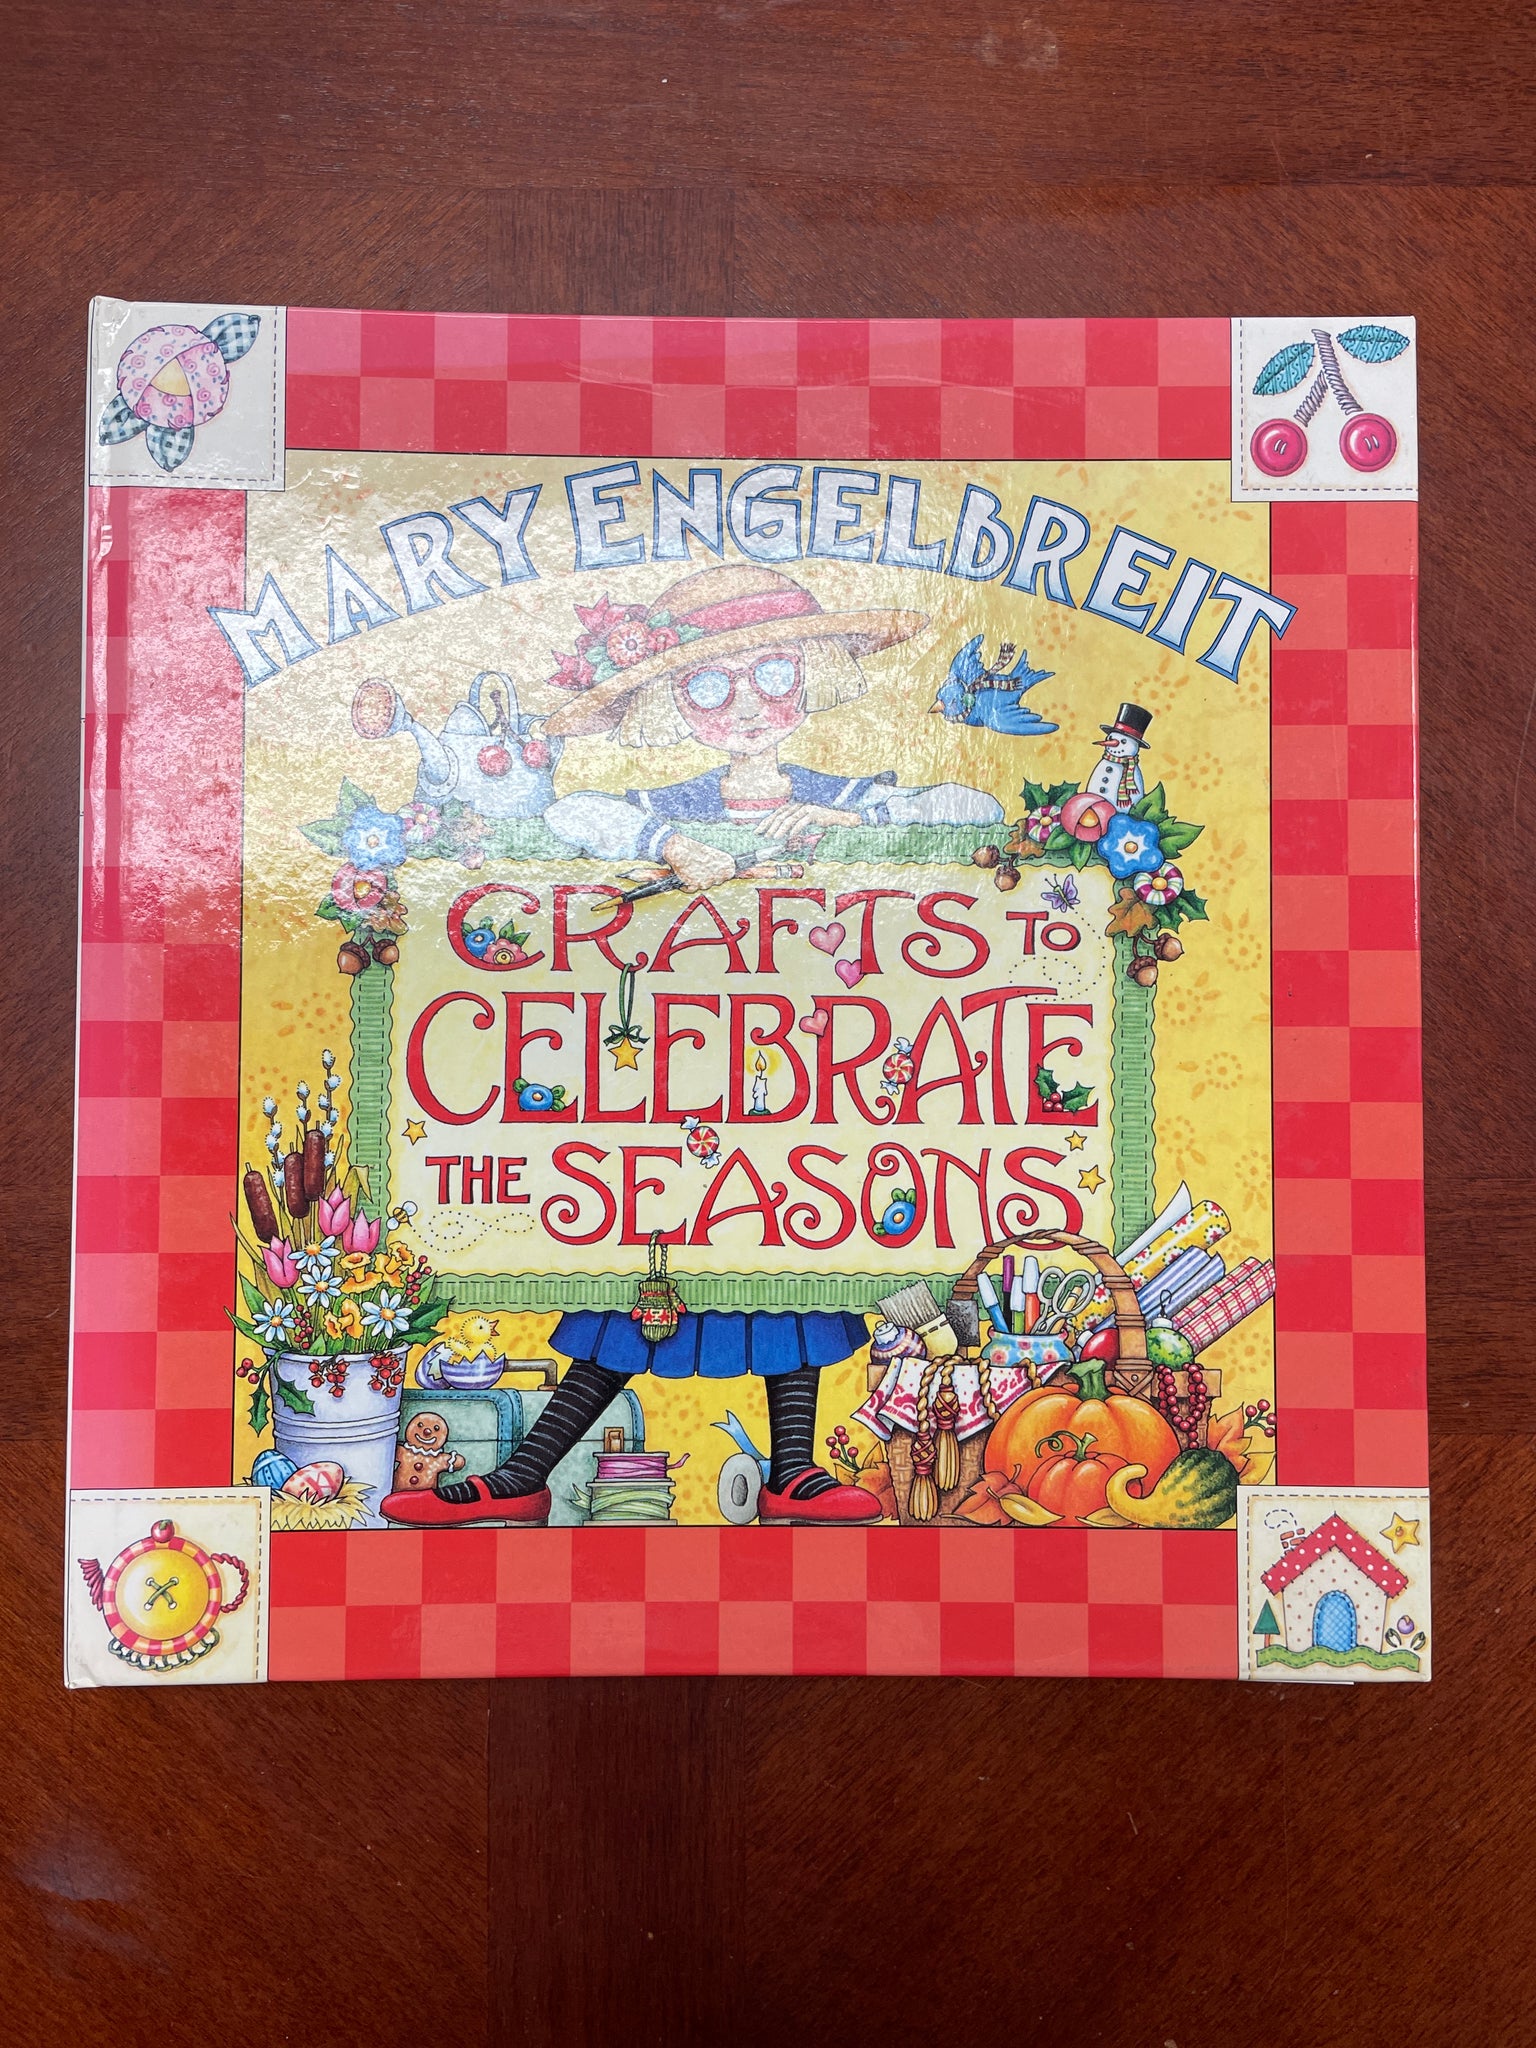 1999 Arts & Crafts Book - "Crafts to Celebrate the Seasons"